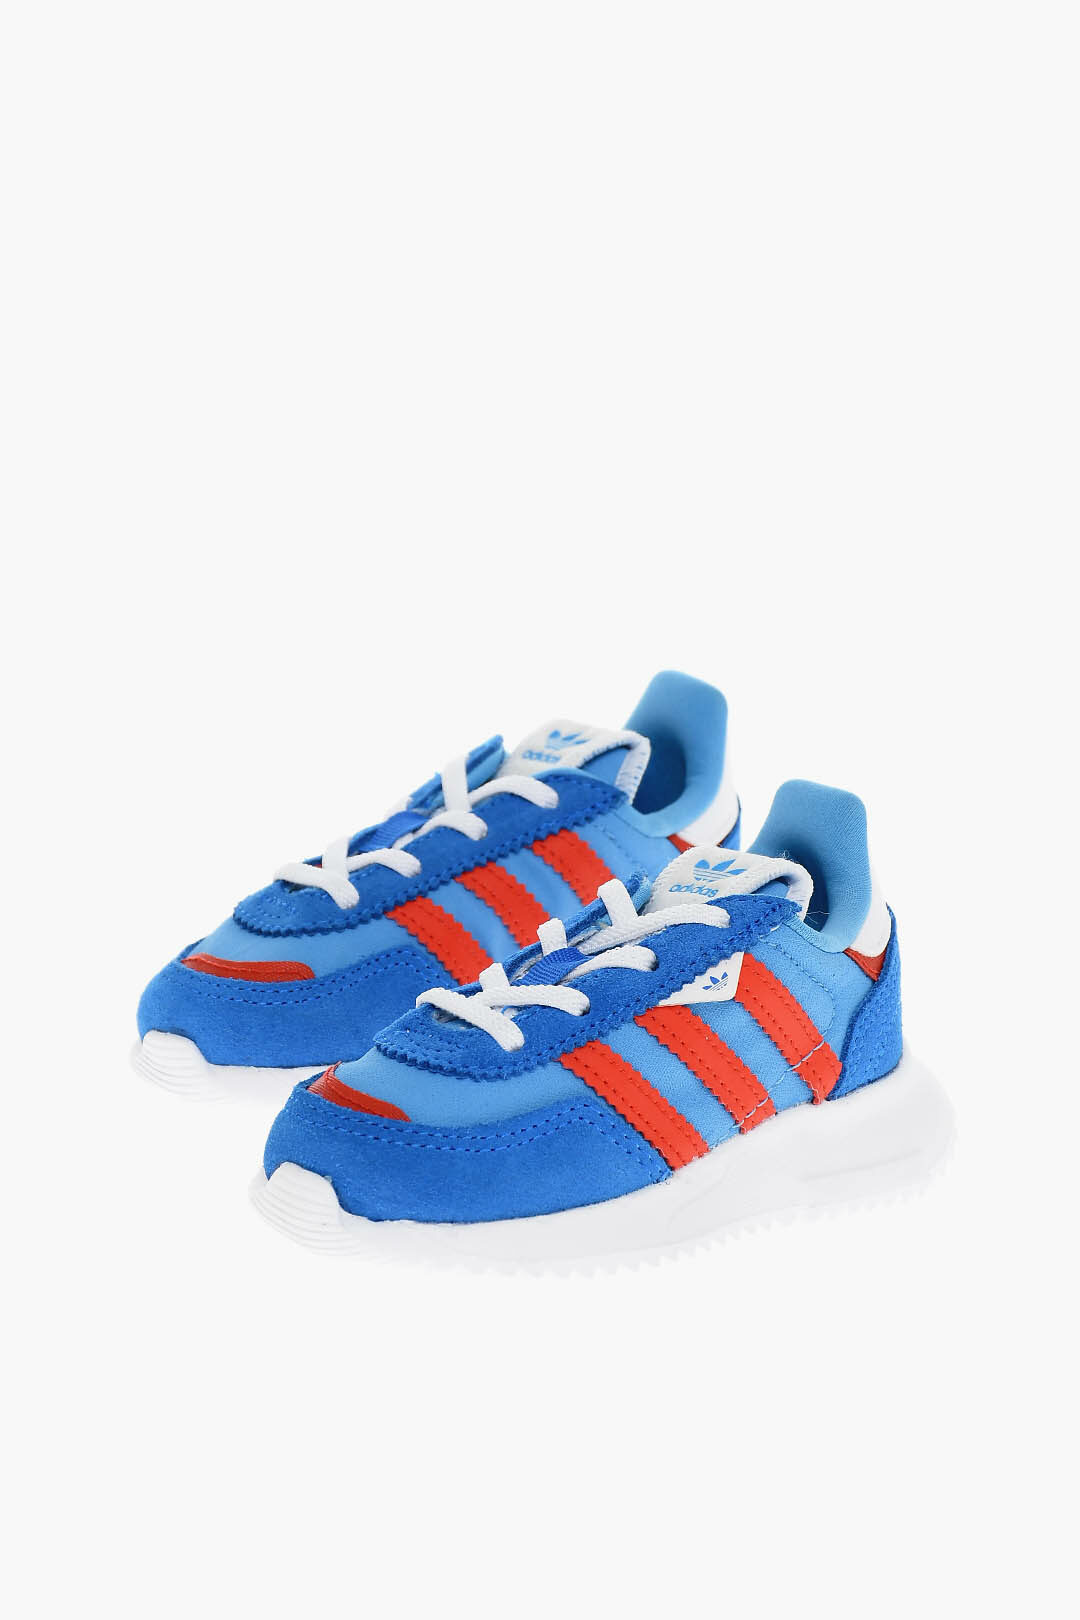 Kids Lace-up RETROPY F2 Sneakers with Side Stripes unisex boys girls - Outlet